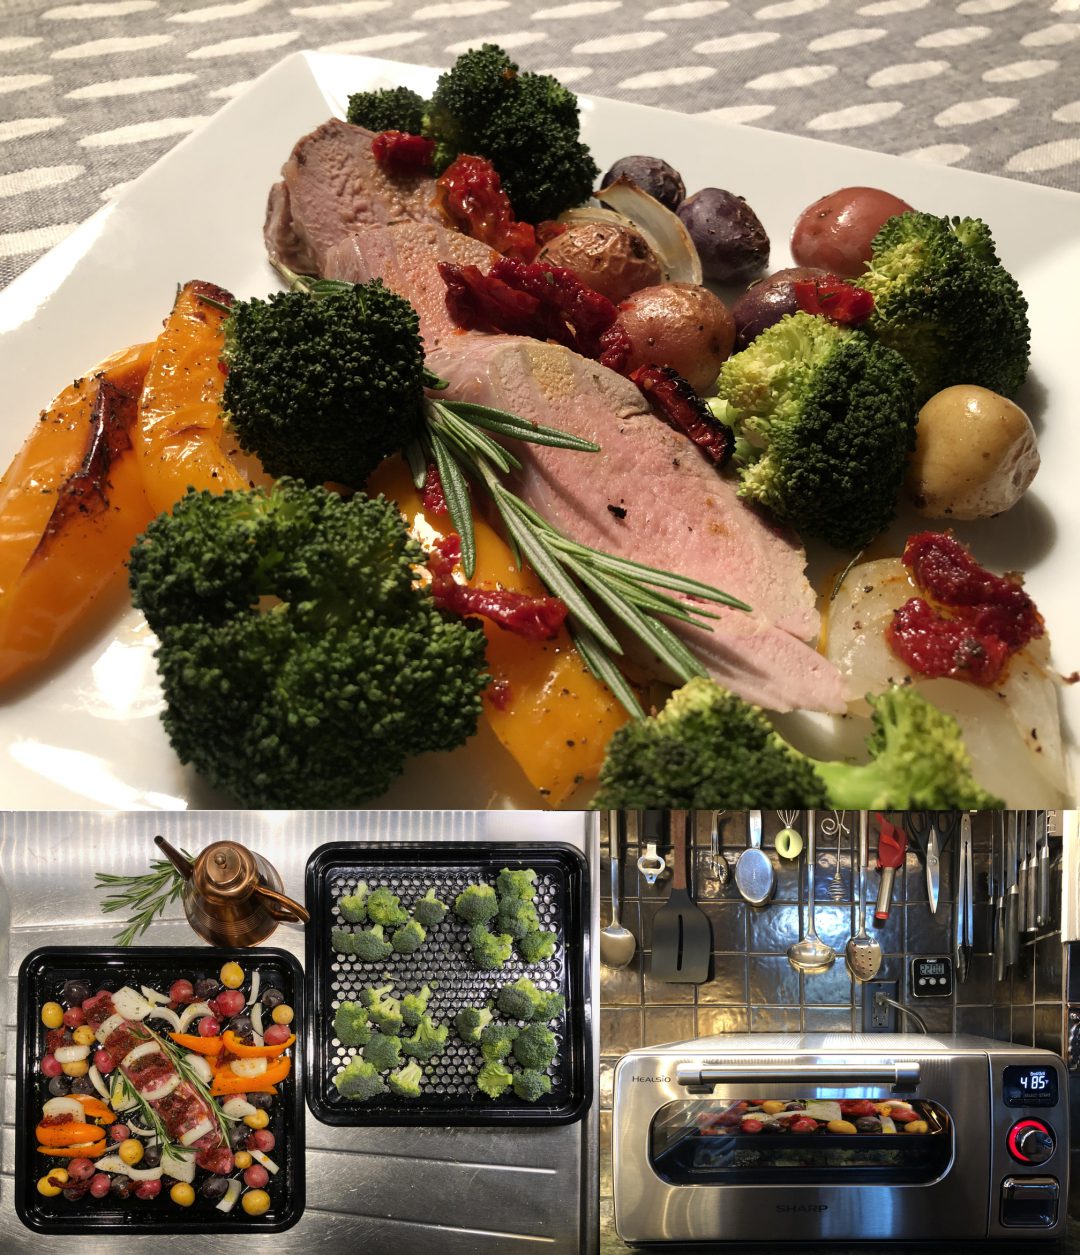 Pork Tenderloin with Sun-dried Tomato, Rosemary, and Roasted Veggies being prepared in a Sharp Supersteam Countertop Oven.